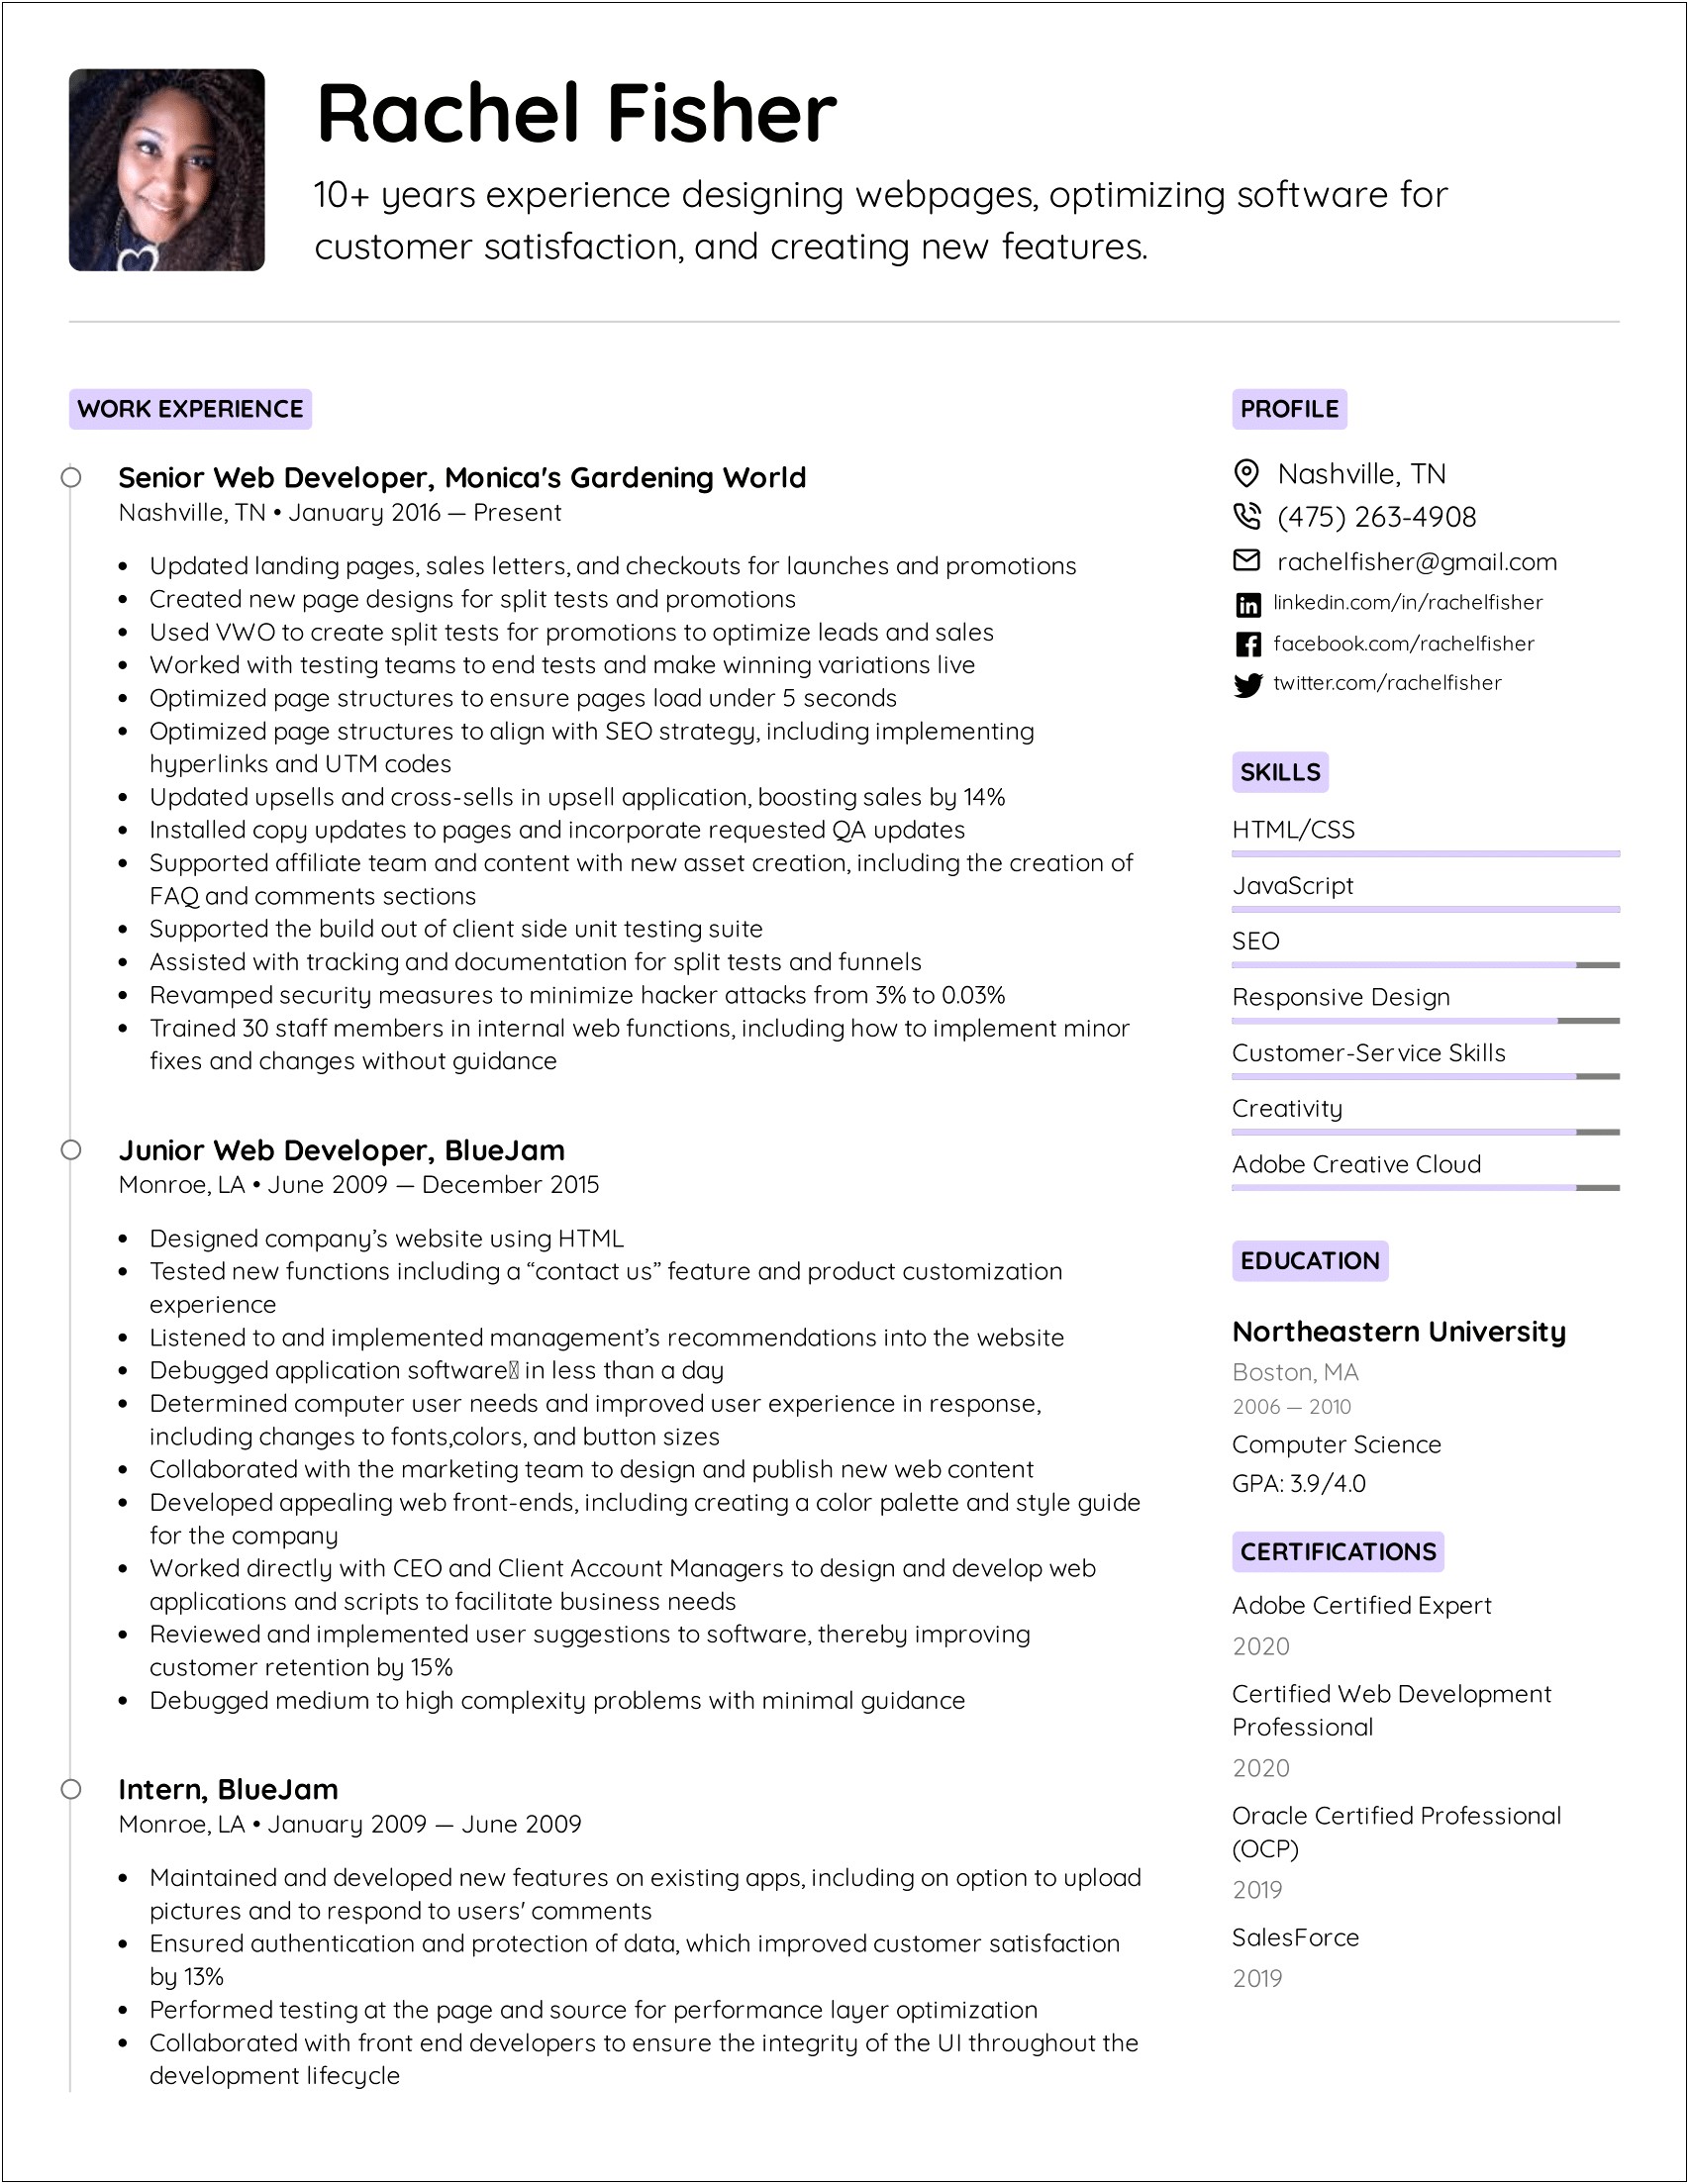 Best Weaknesses To Put On Job Resume